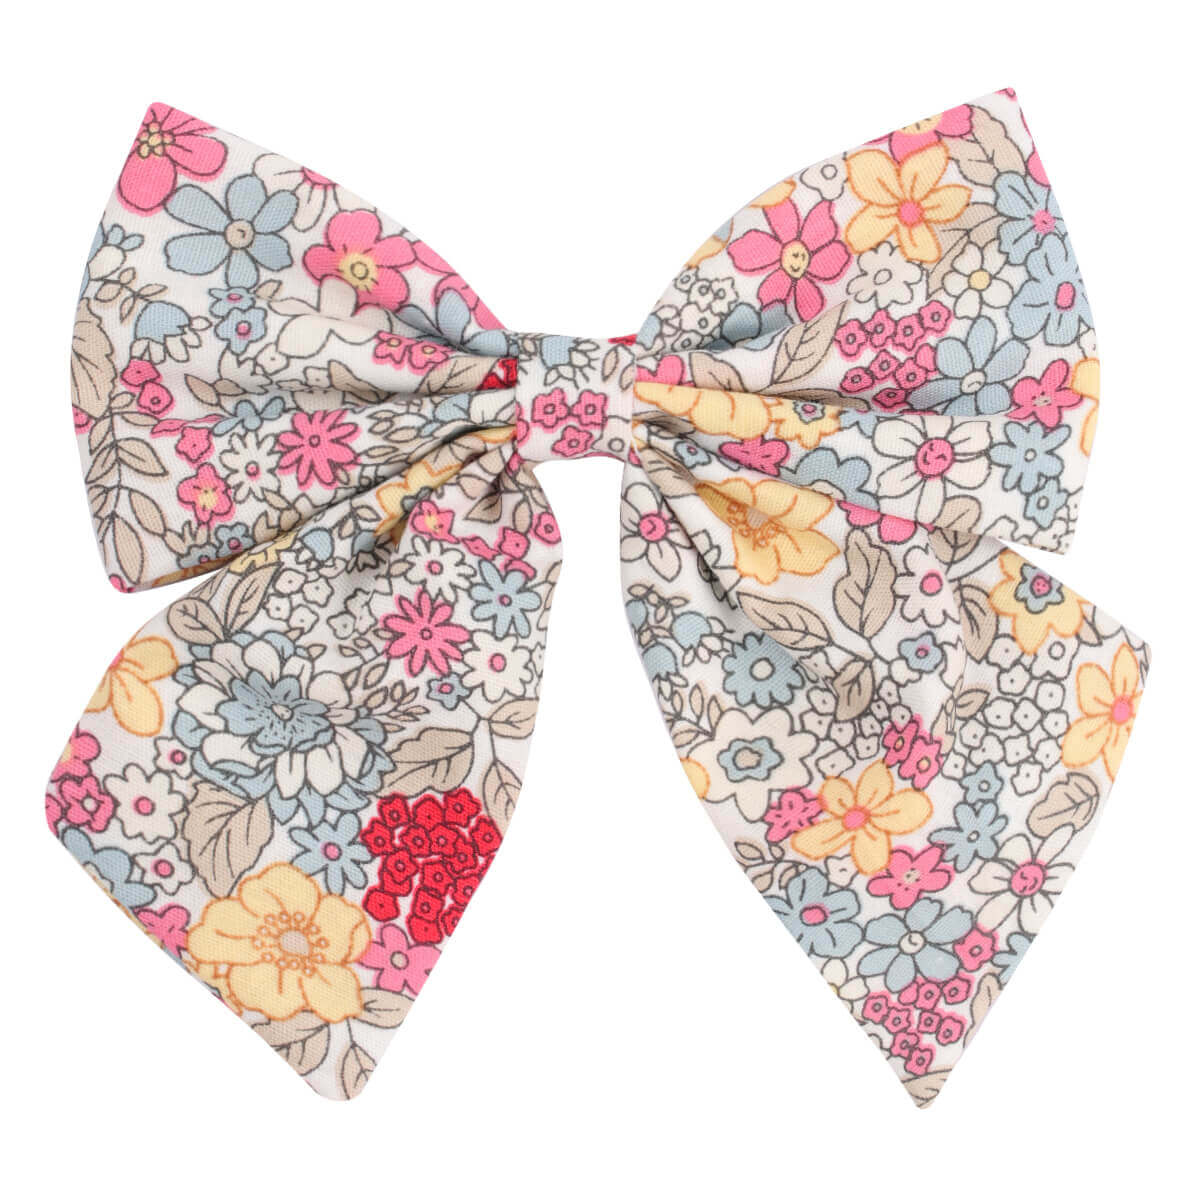 4.5'' Colorful Flowers Fabric Fable Bows